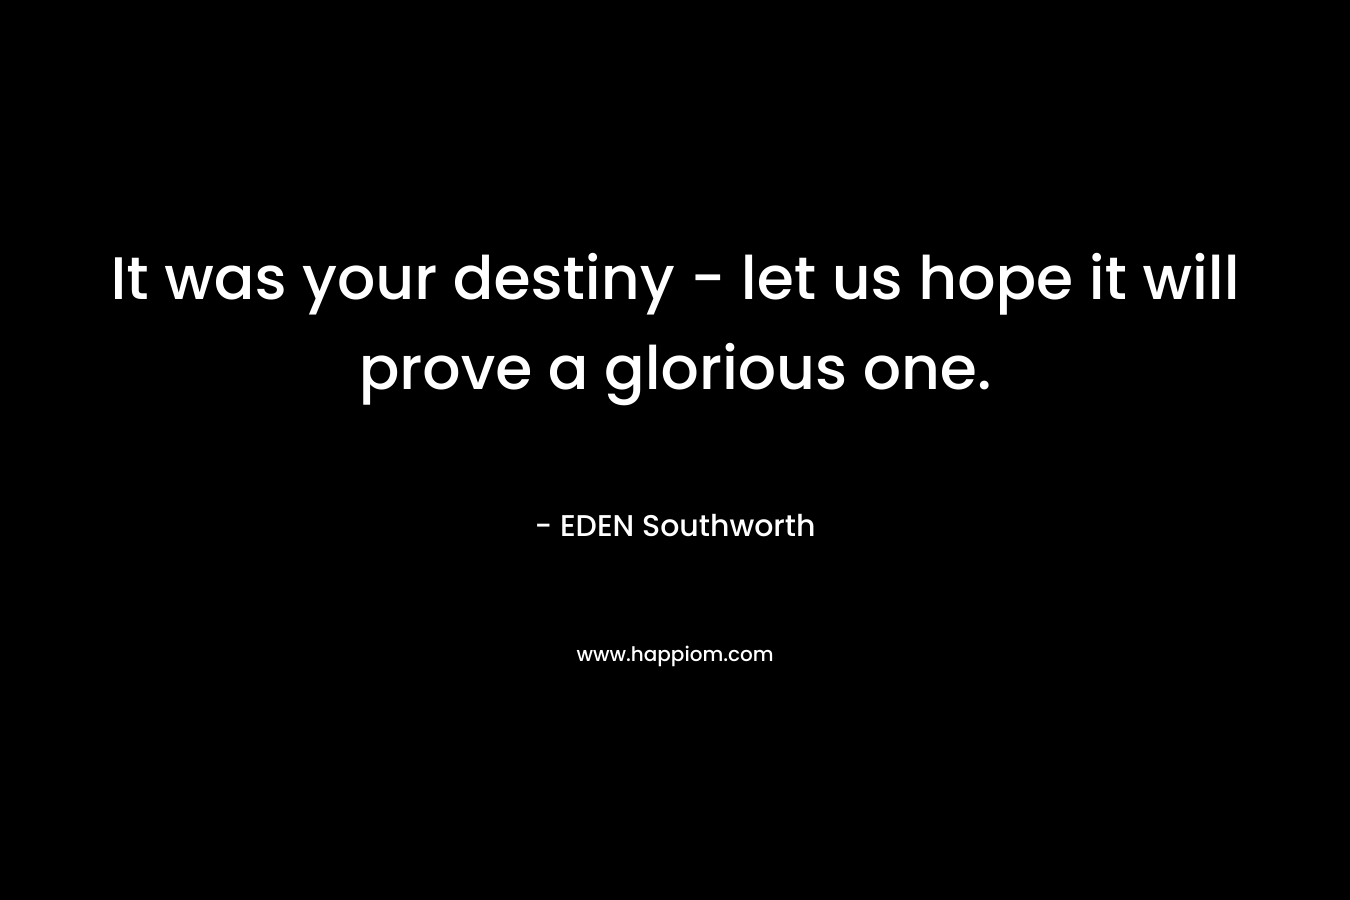 It was your destiny – let us hope it will prove a glorious one. – EDEN Southworth